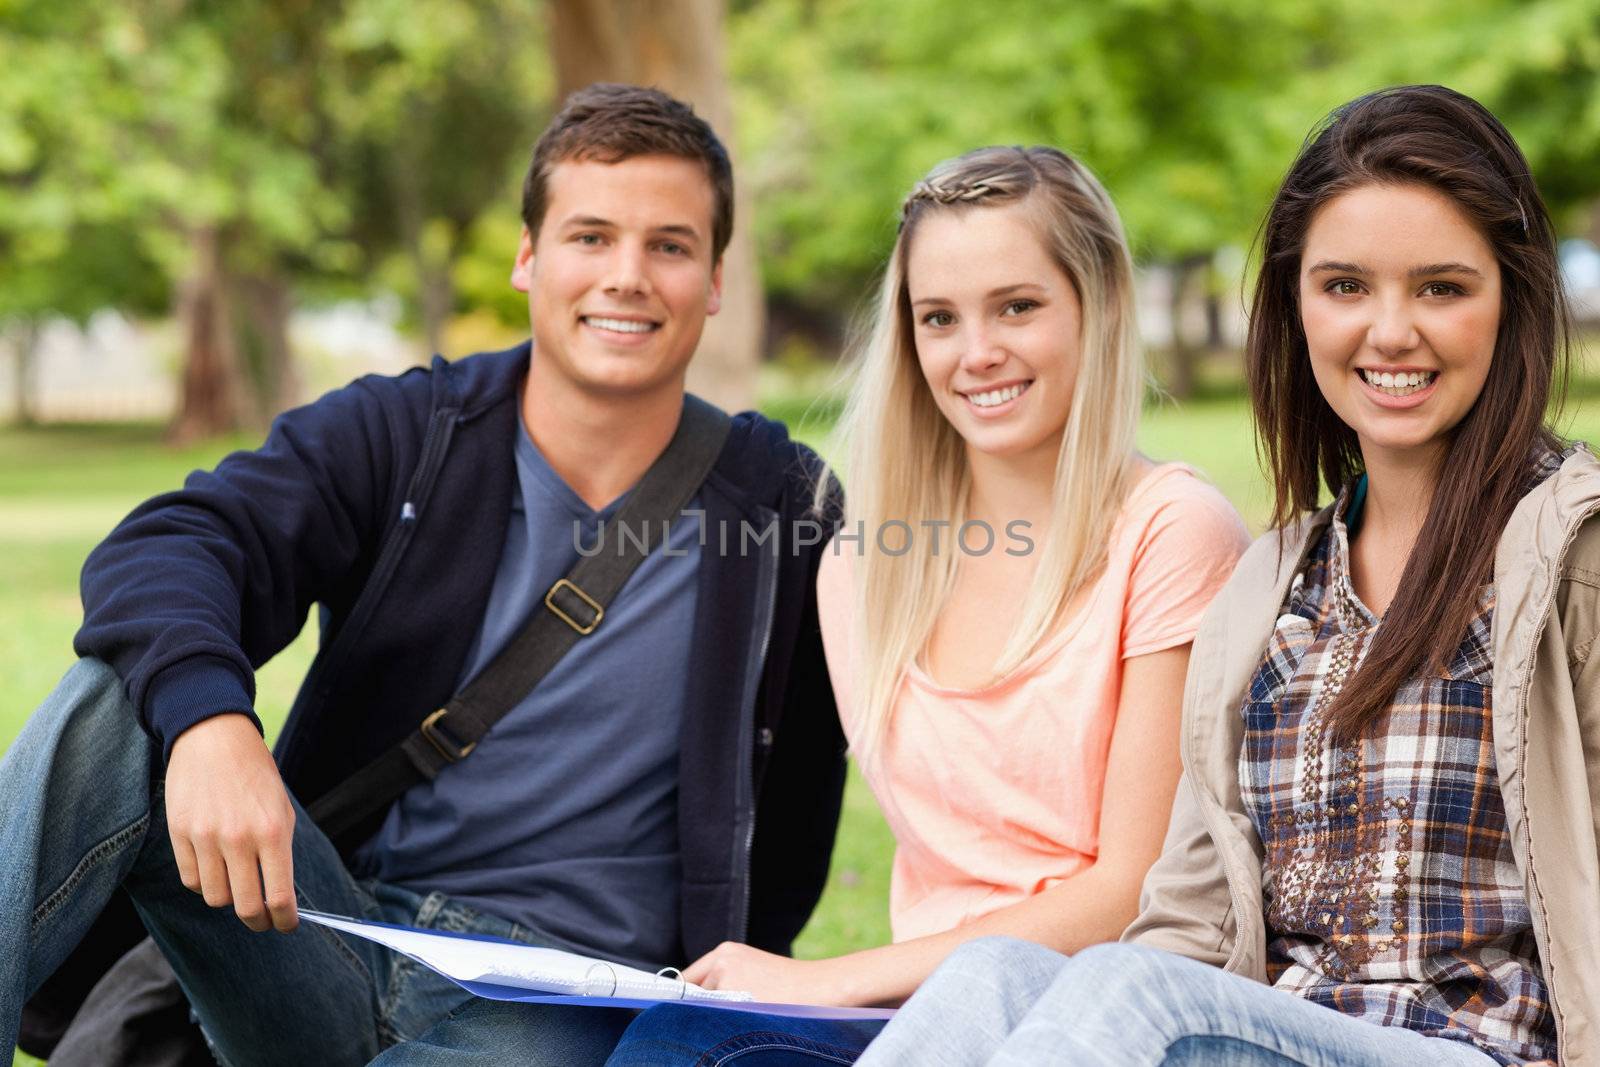 Portrait of students studying together while sitting in a park